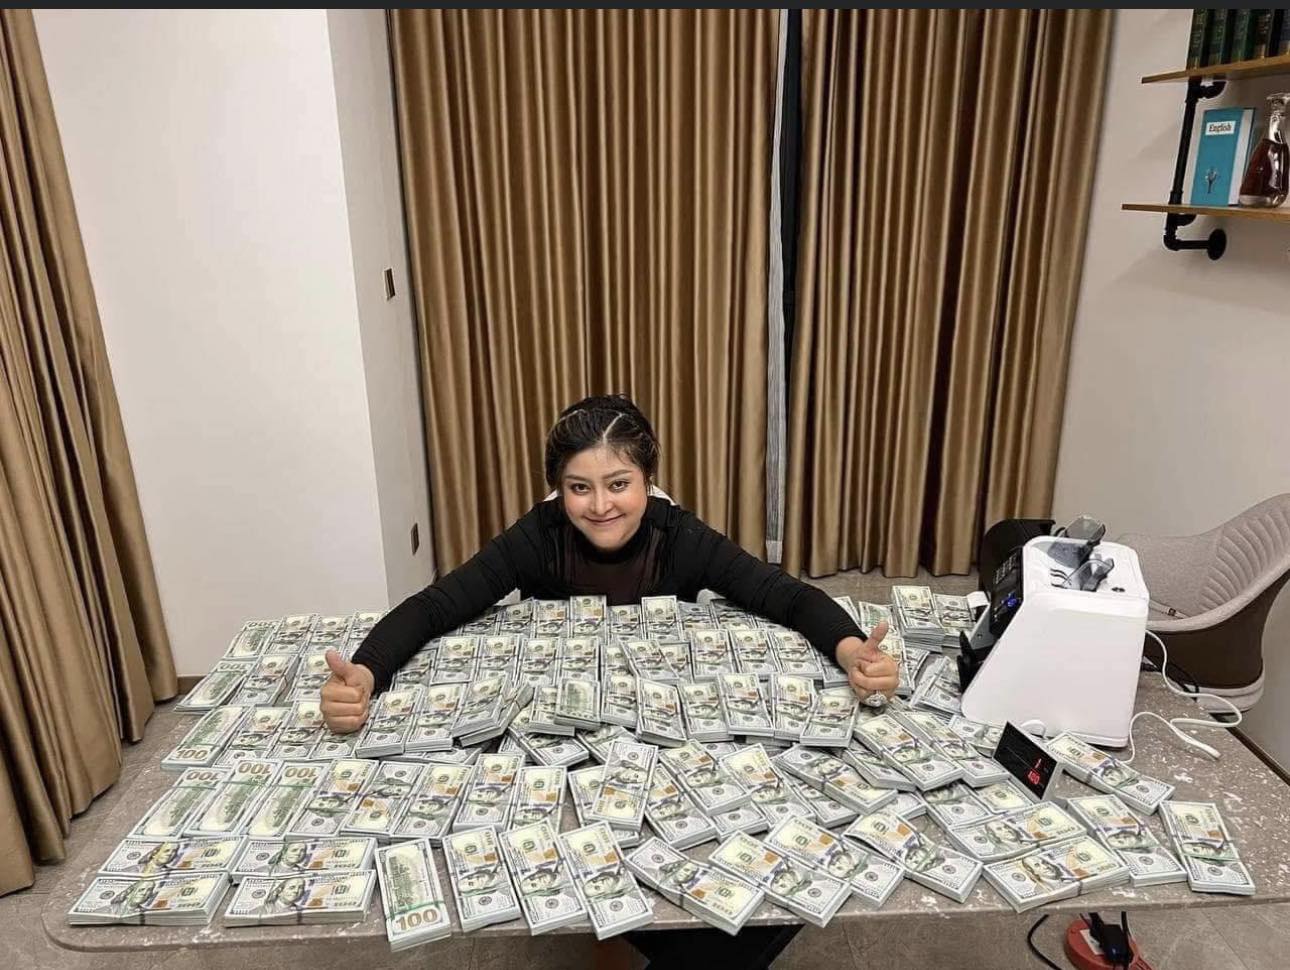 Oeun Molika holds two thumbs up over a table covered in stacks of hundred dollar bills, in a photo posted to the National Military Police Facebook page on December 14, 2022.